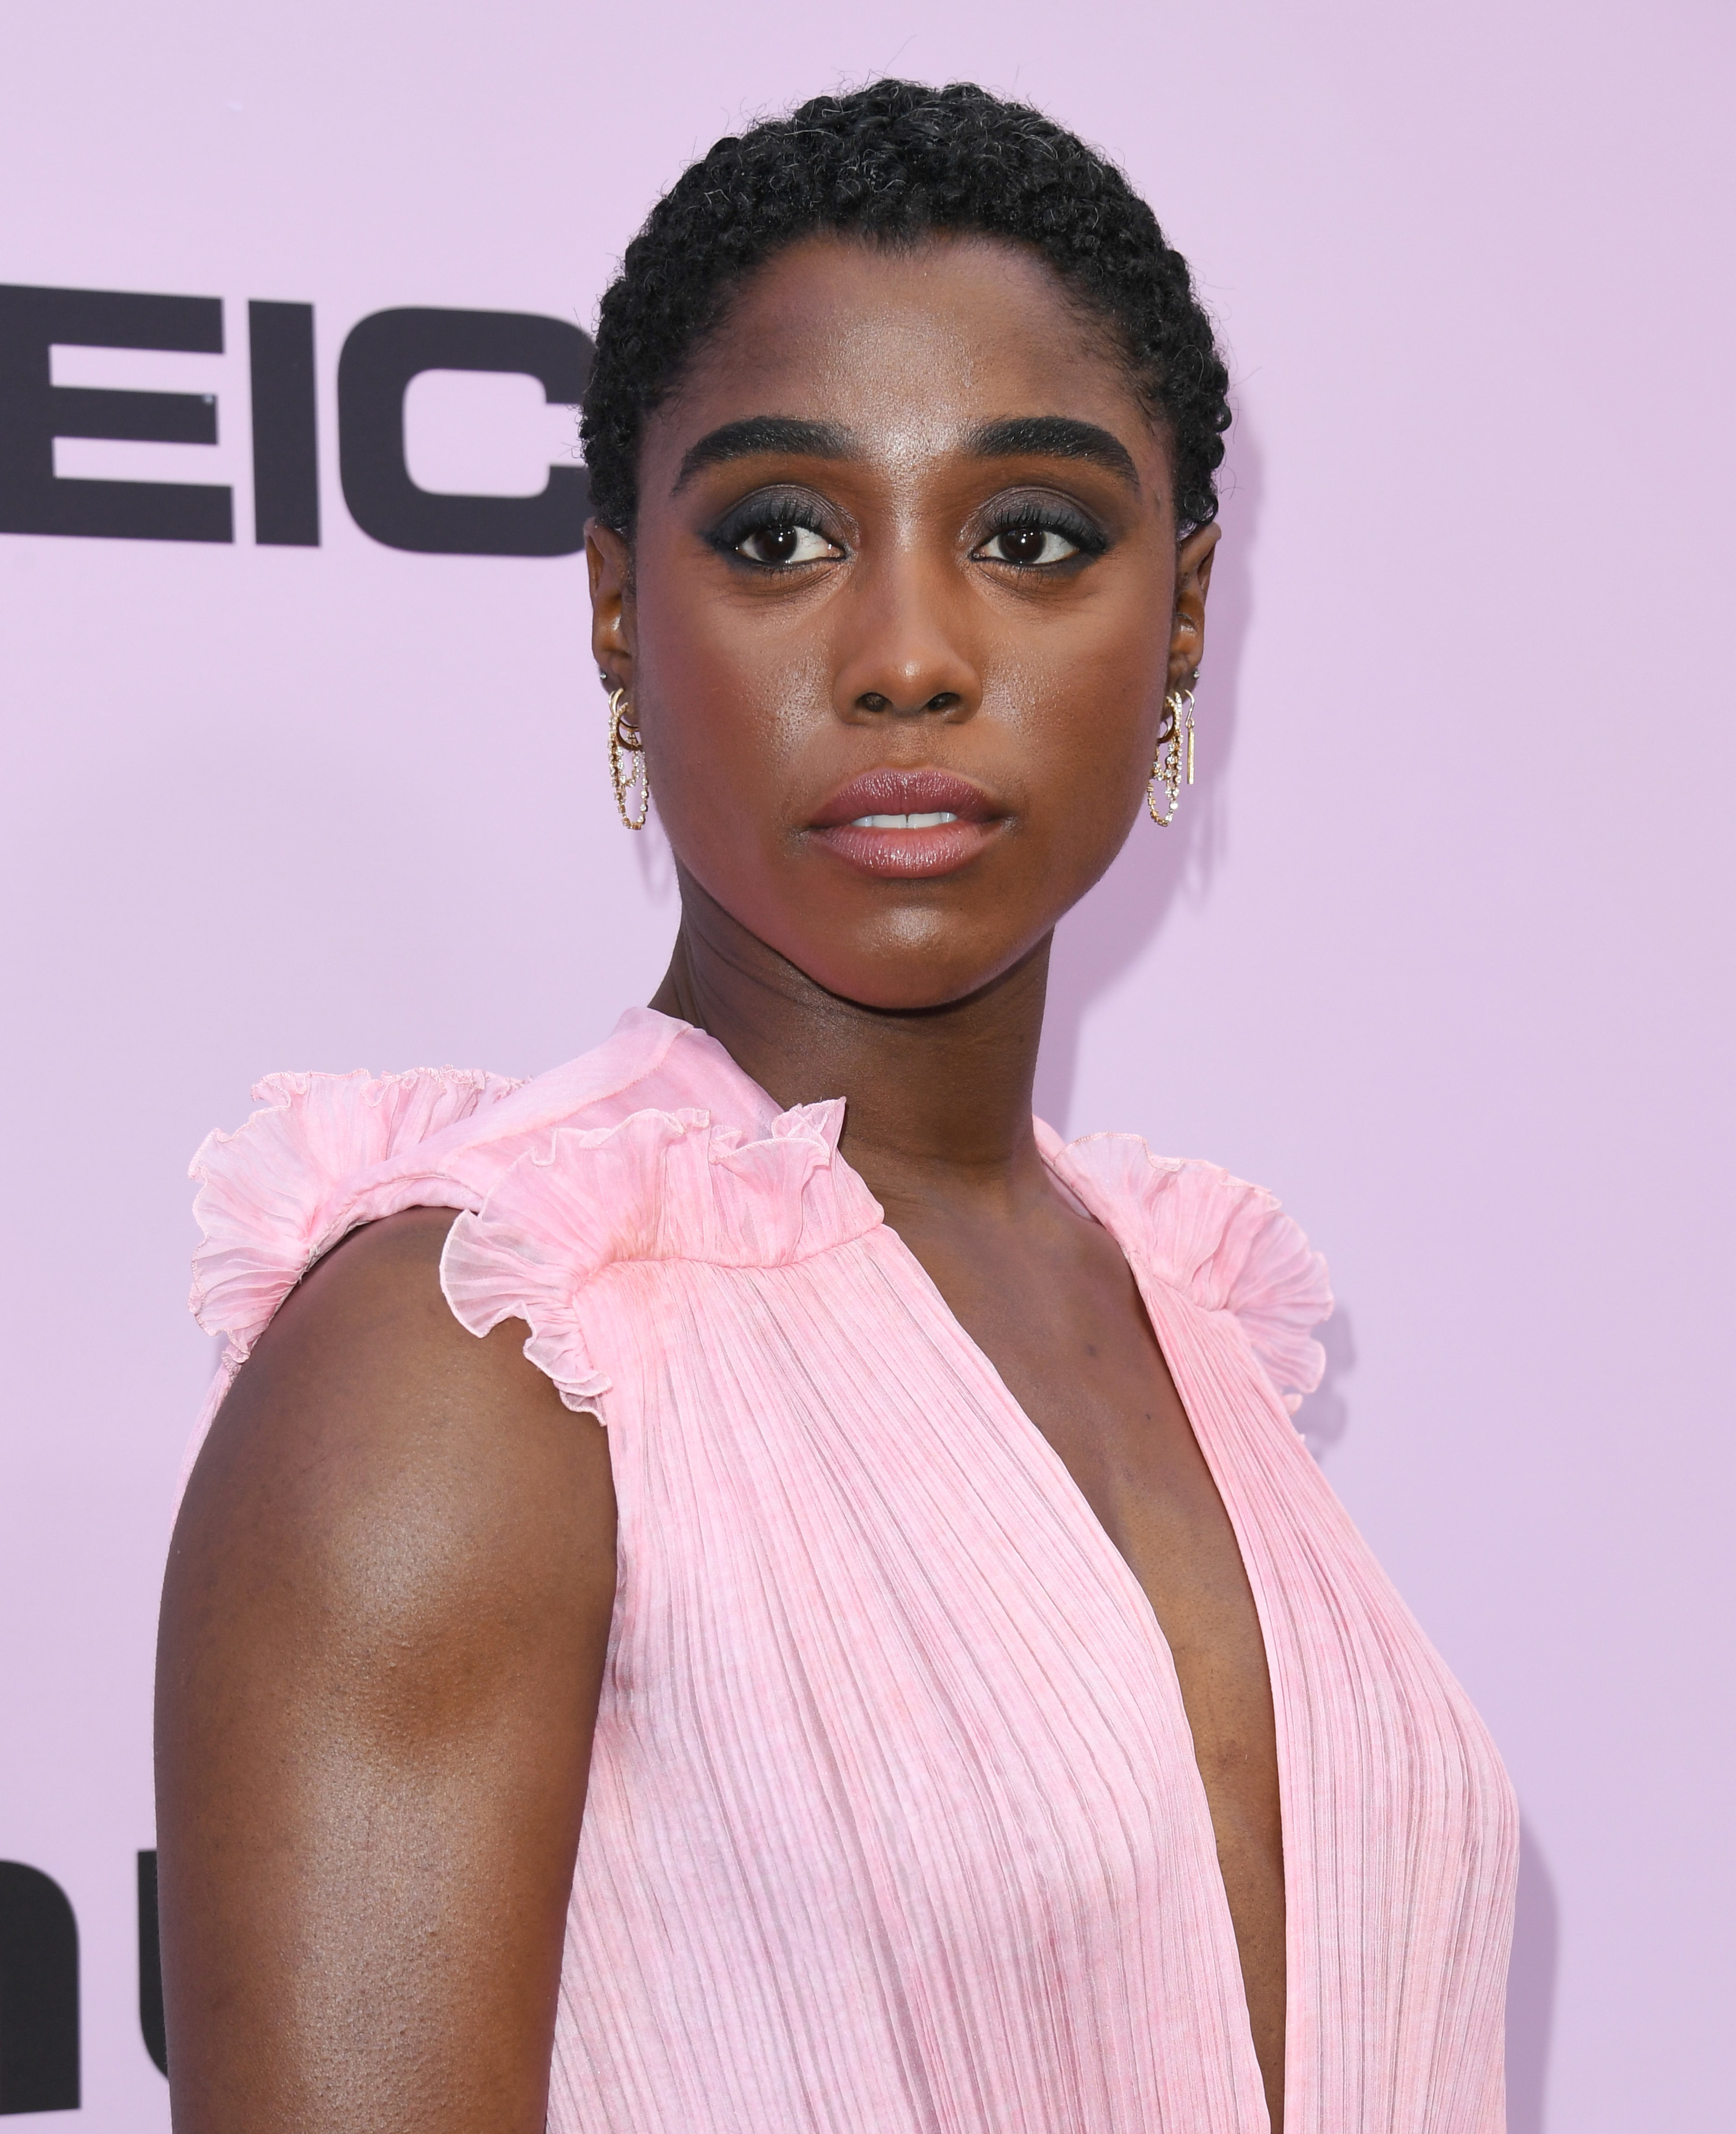 Lashana Lynch attends the 13th Annual Essence Black Women In Hollywood Awards Luncheon at the Beverly Wilshire Four Seasons Hotel on February 06, 2020 in Beverly Hills, California.